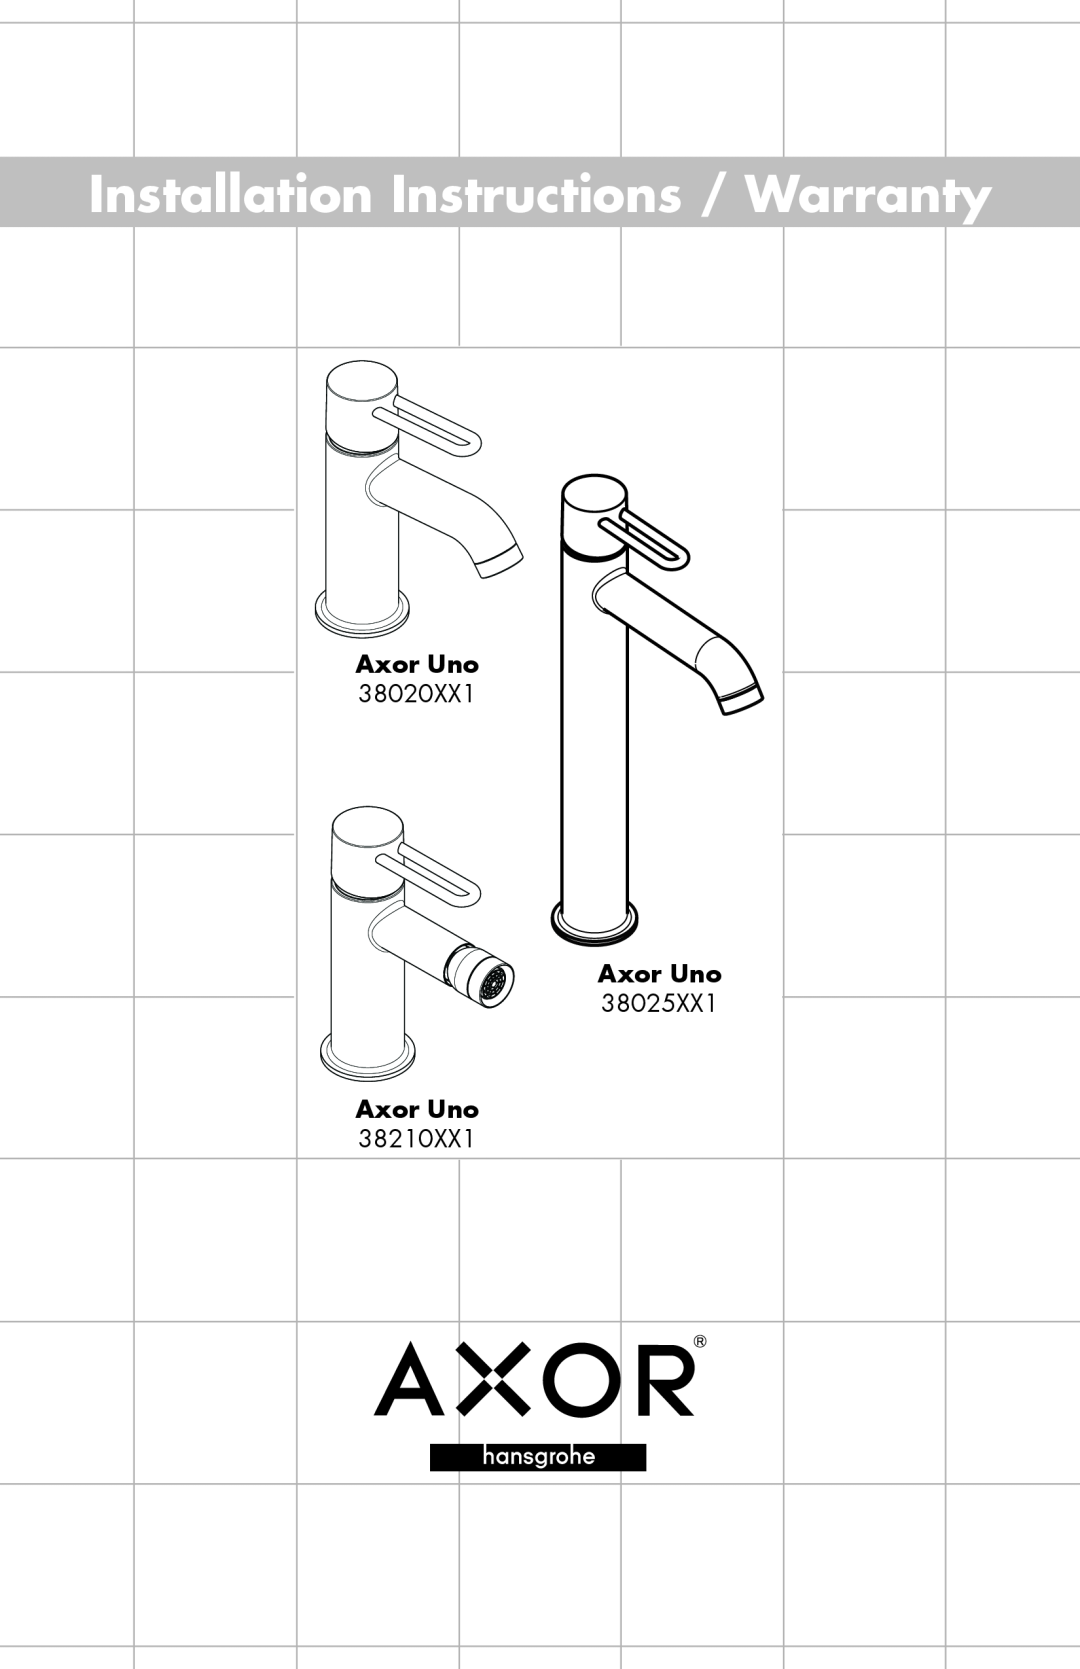 Axor 38210XX1 specifications Axor Uno² Bidet Mixer, Product Features, Code Compliance, Available Finishes 